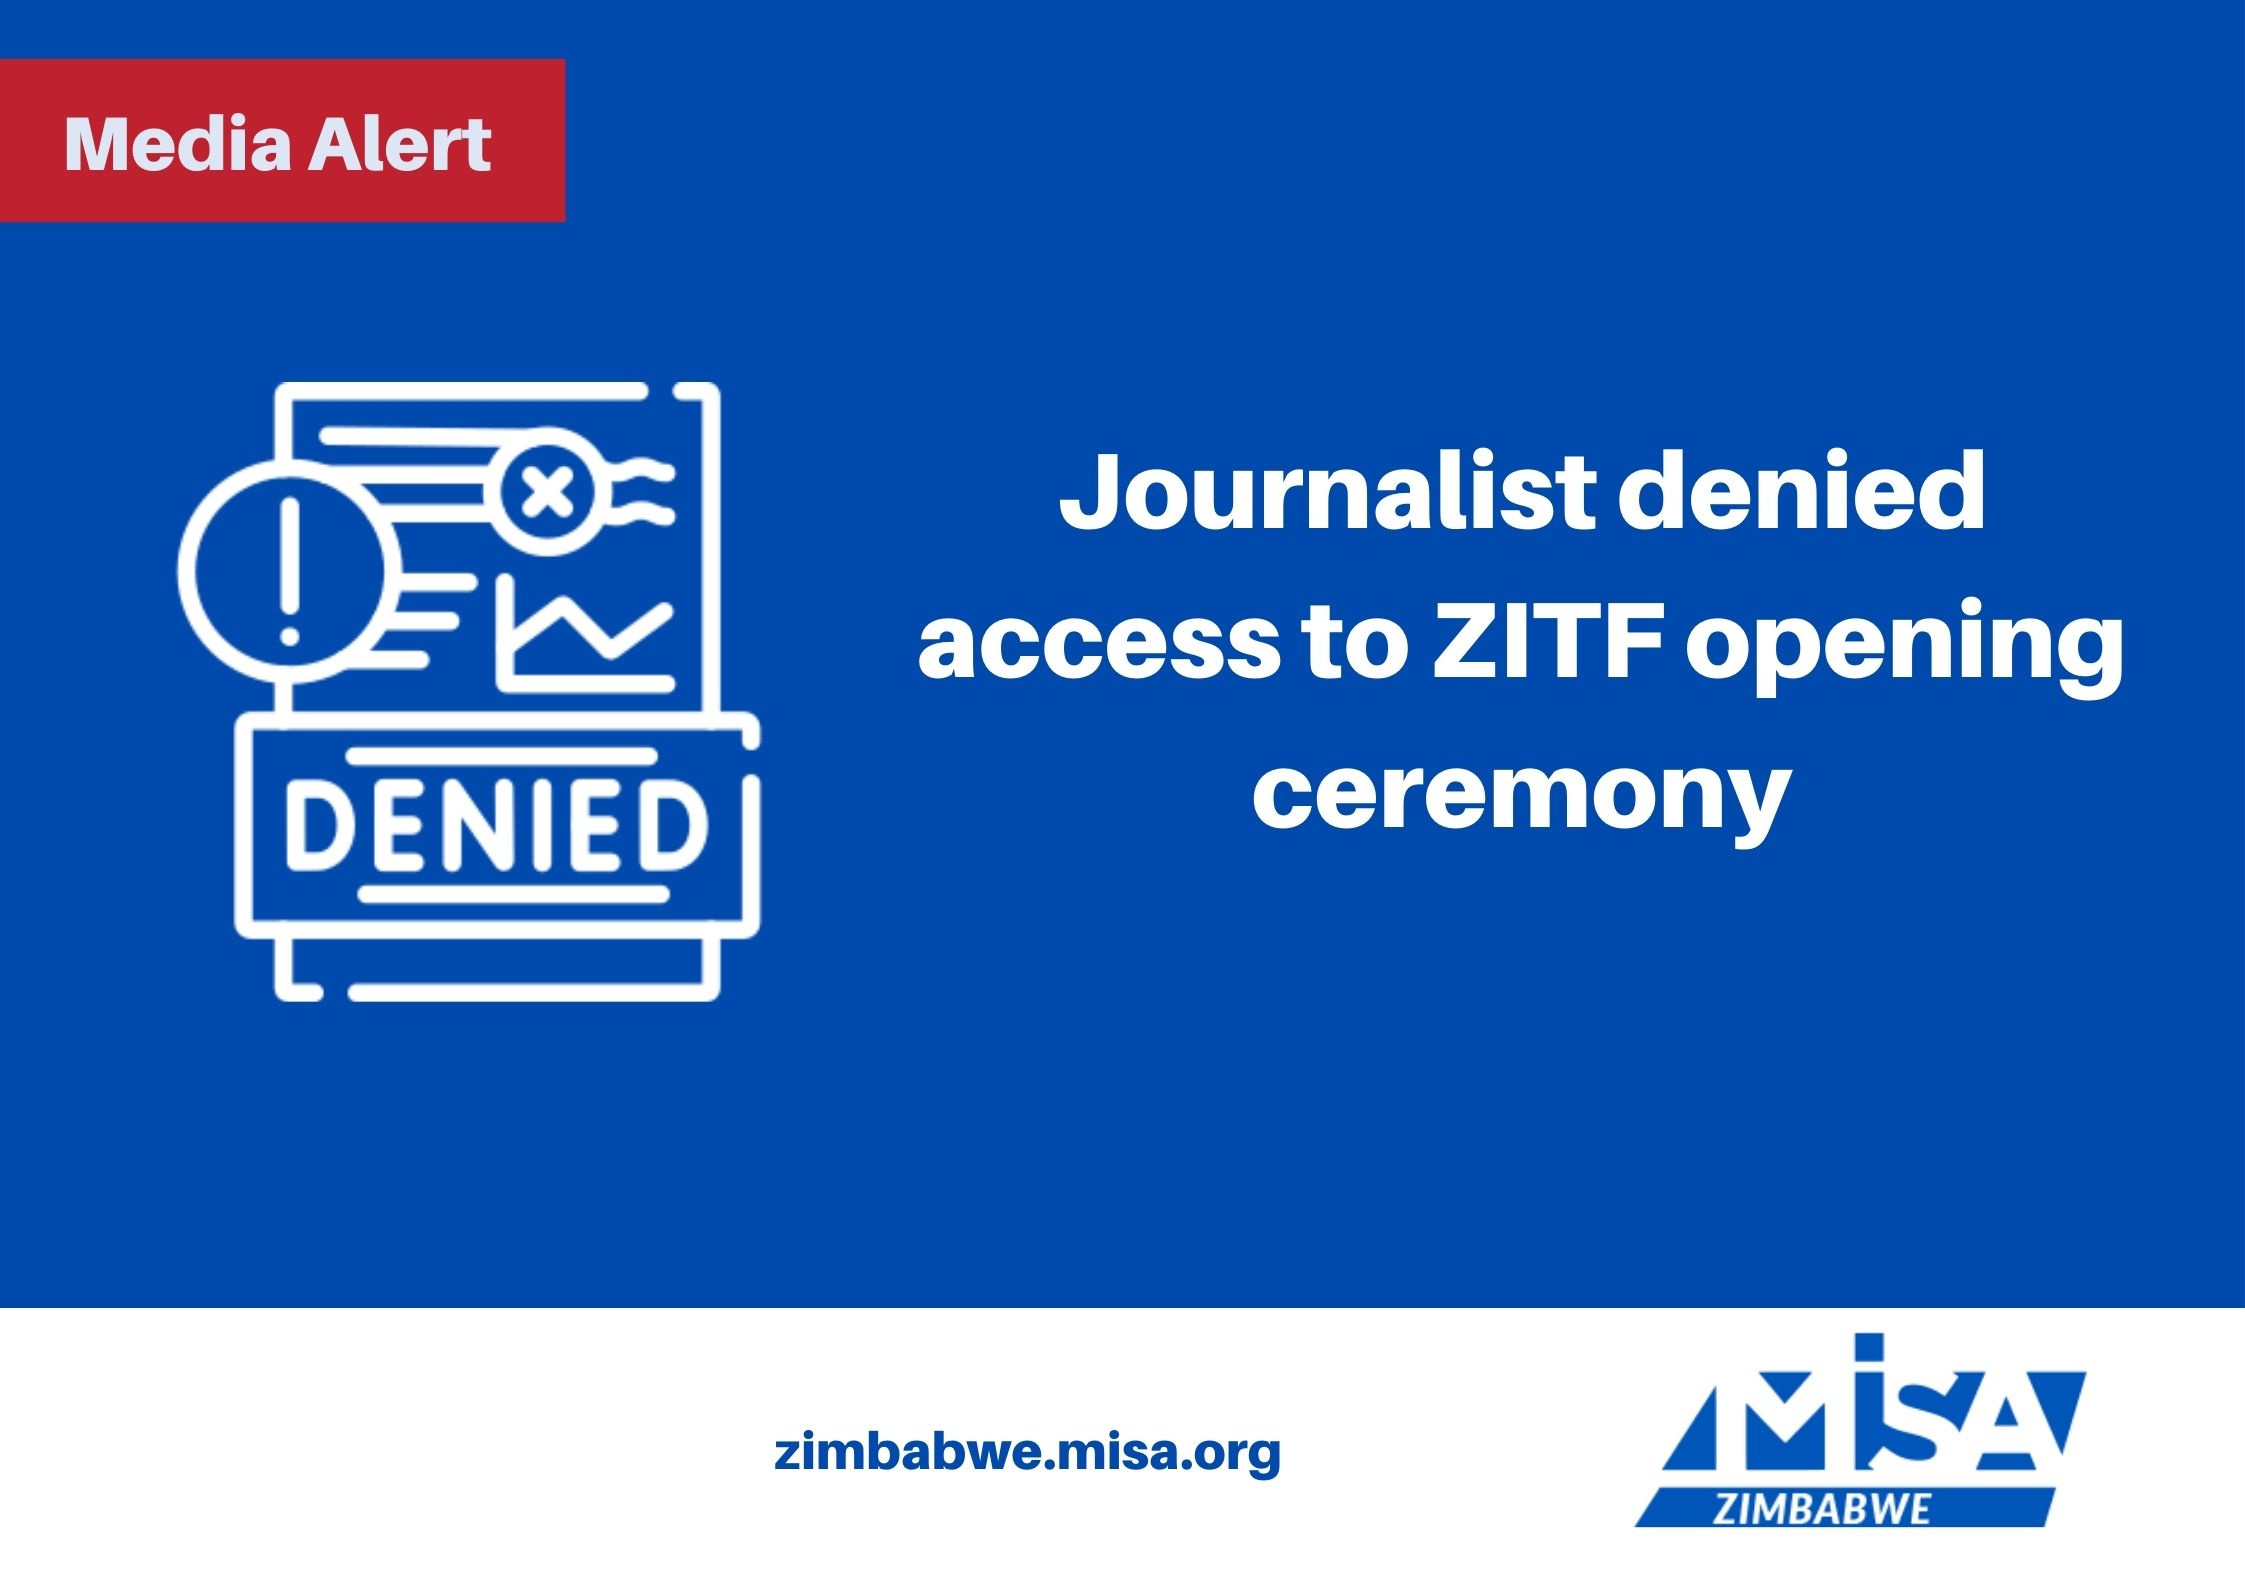 Journalist denied access to ZITF opening ceremony